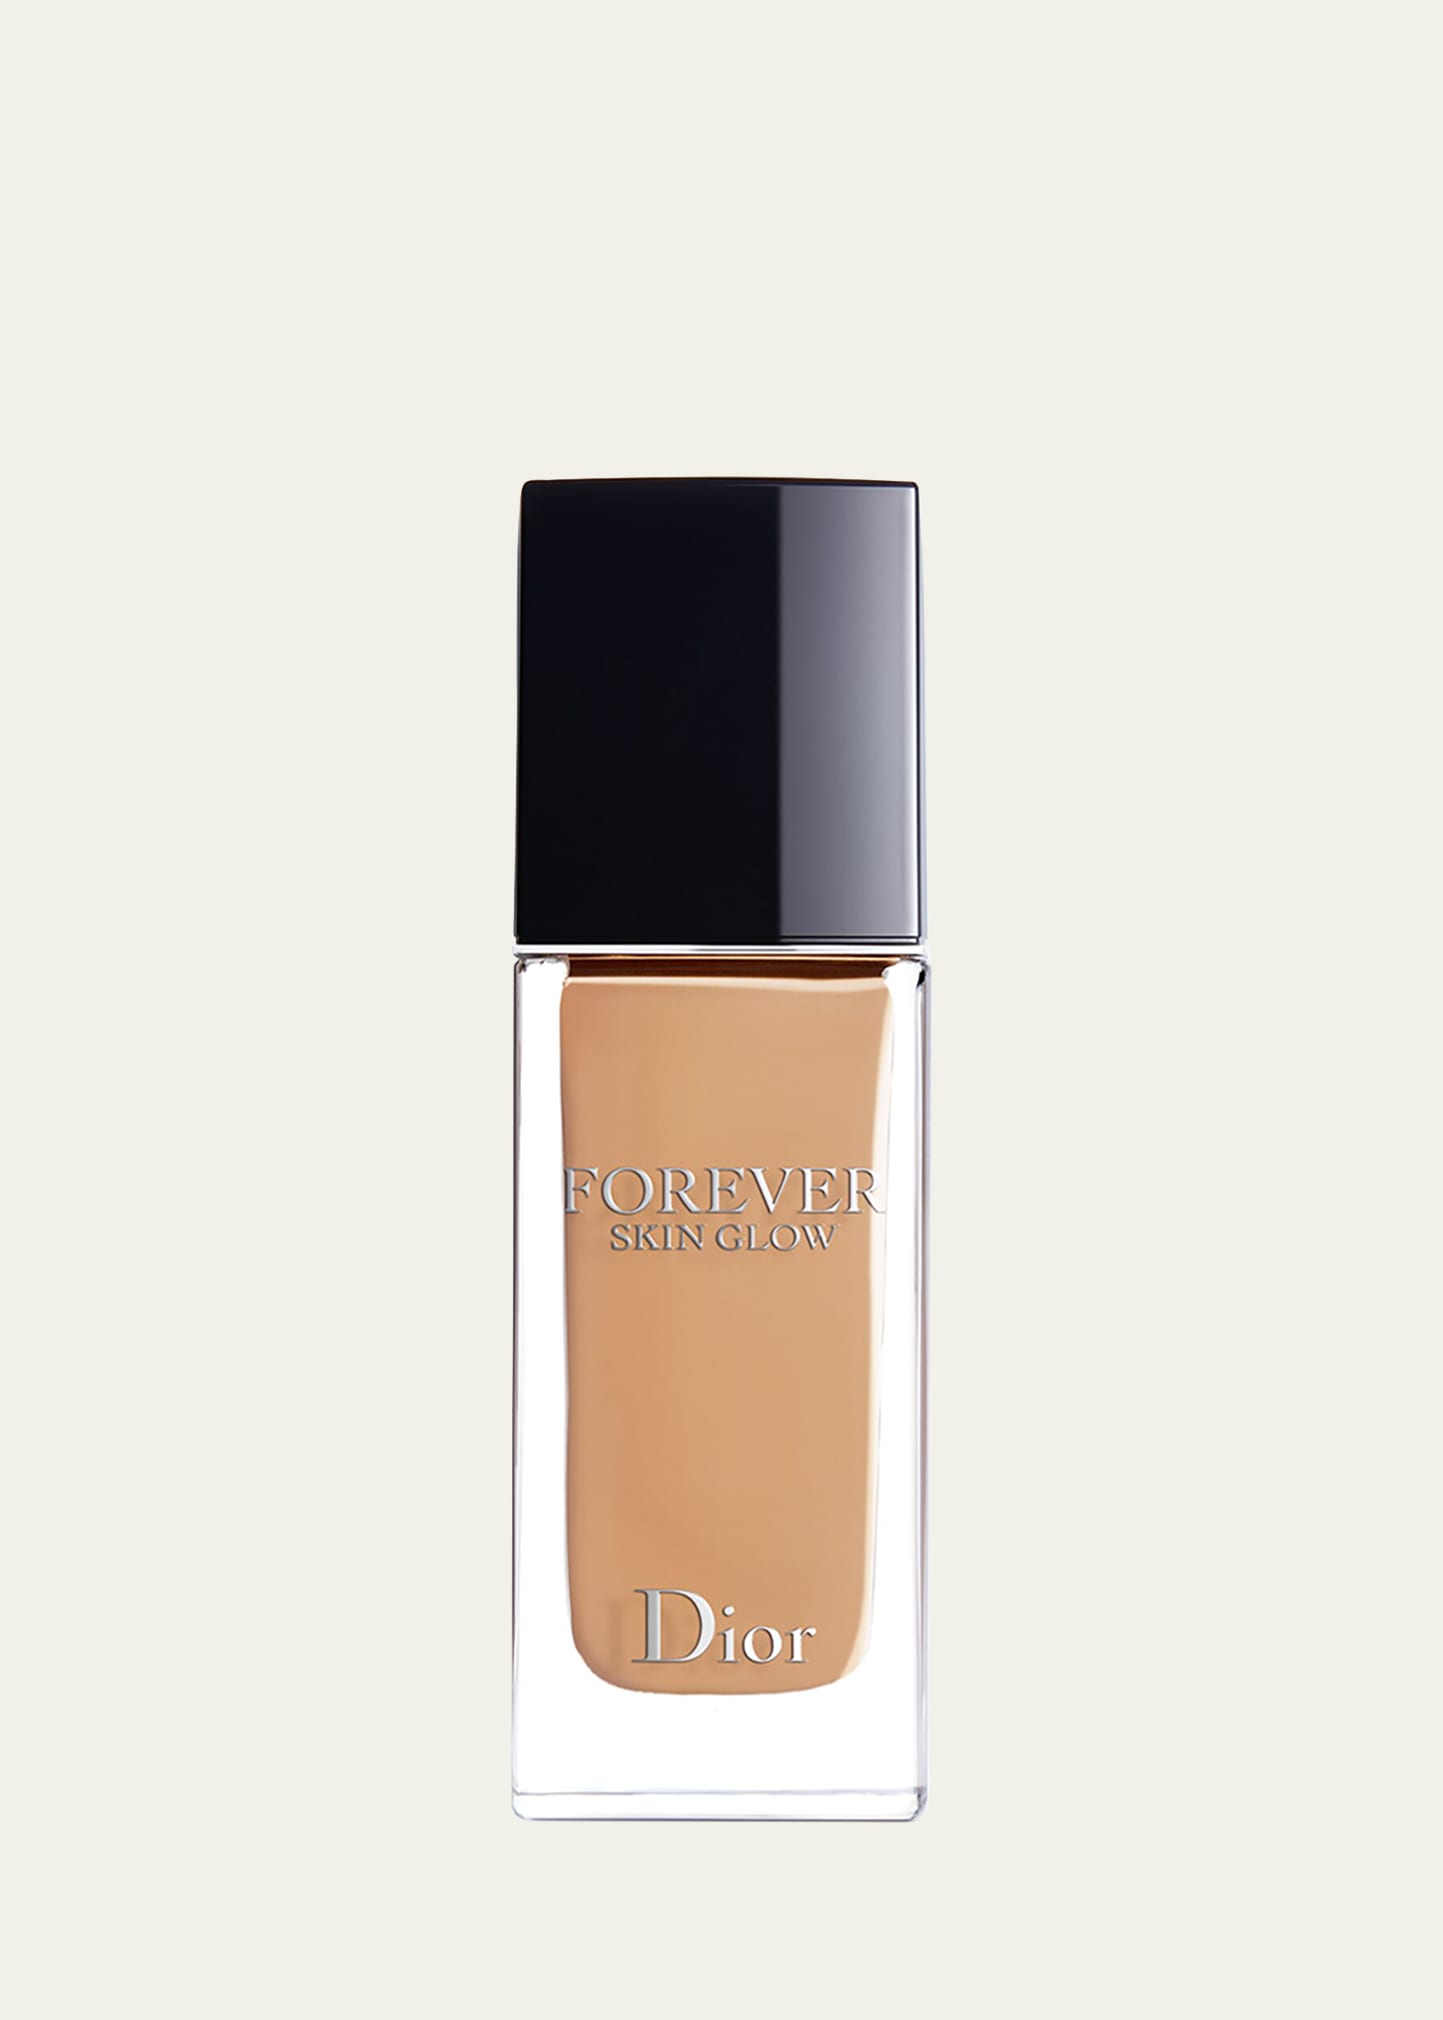 Dior 1 Oz.  Forever Skin Glow Hydrating Foundation Spf 15 In 3.5 Neutral